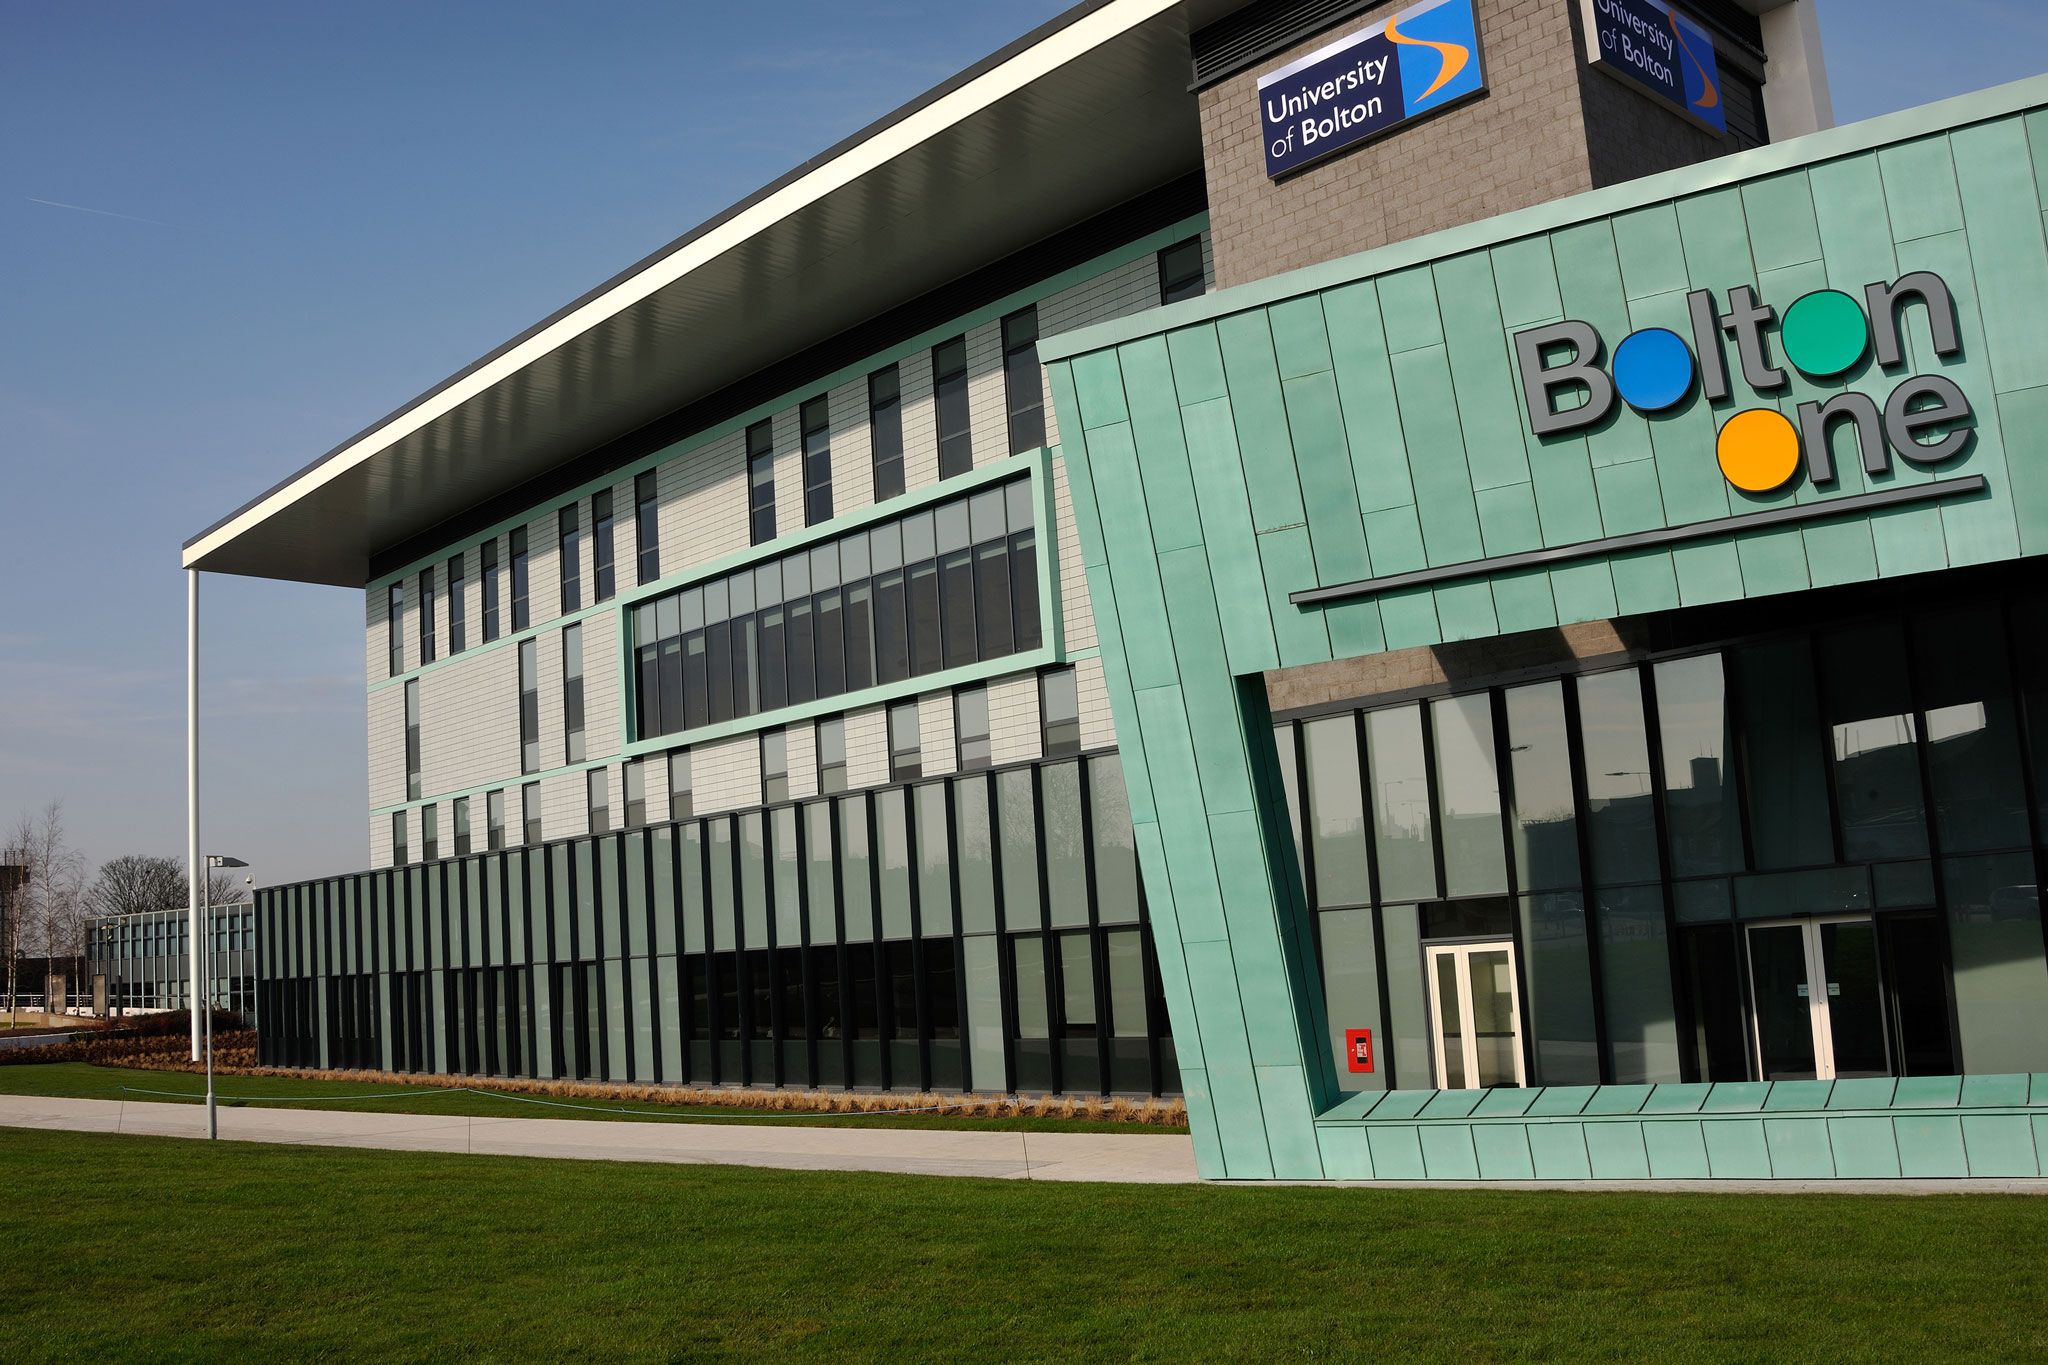 An external view of the Bolton One Sports Facilities at the University of Bolton3